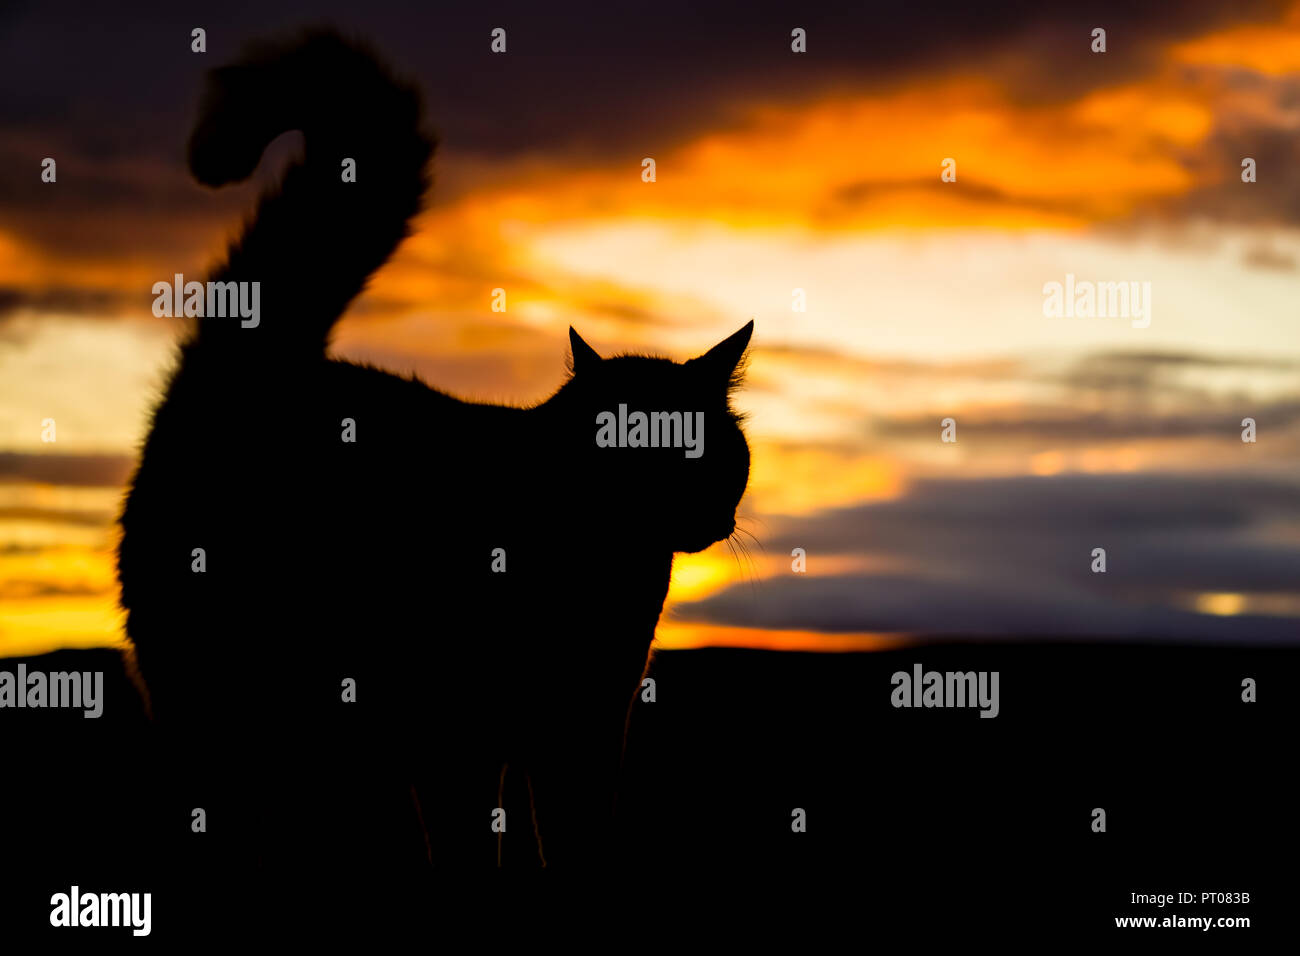 Here you can see the profil of a cat with a dramtic sky in background. Stock Photo